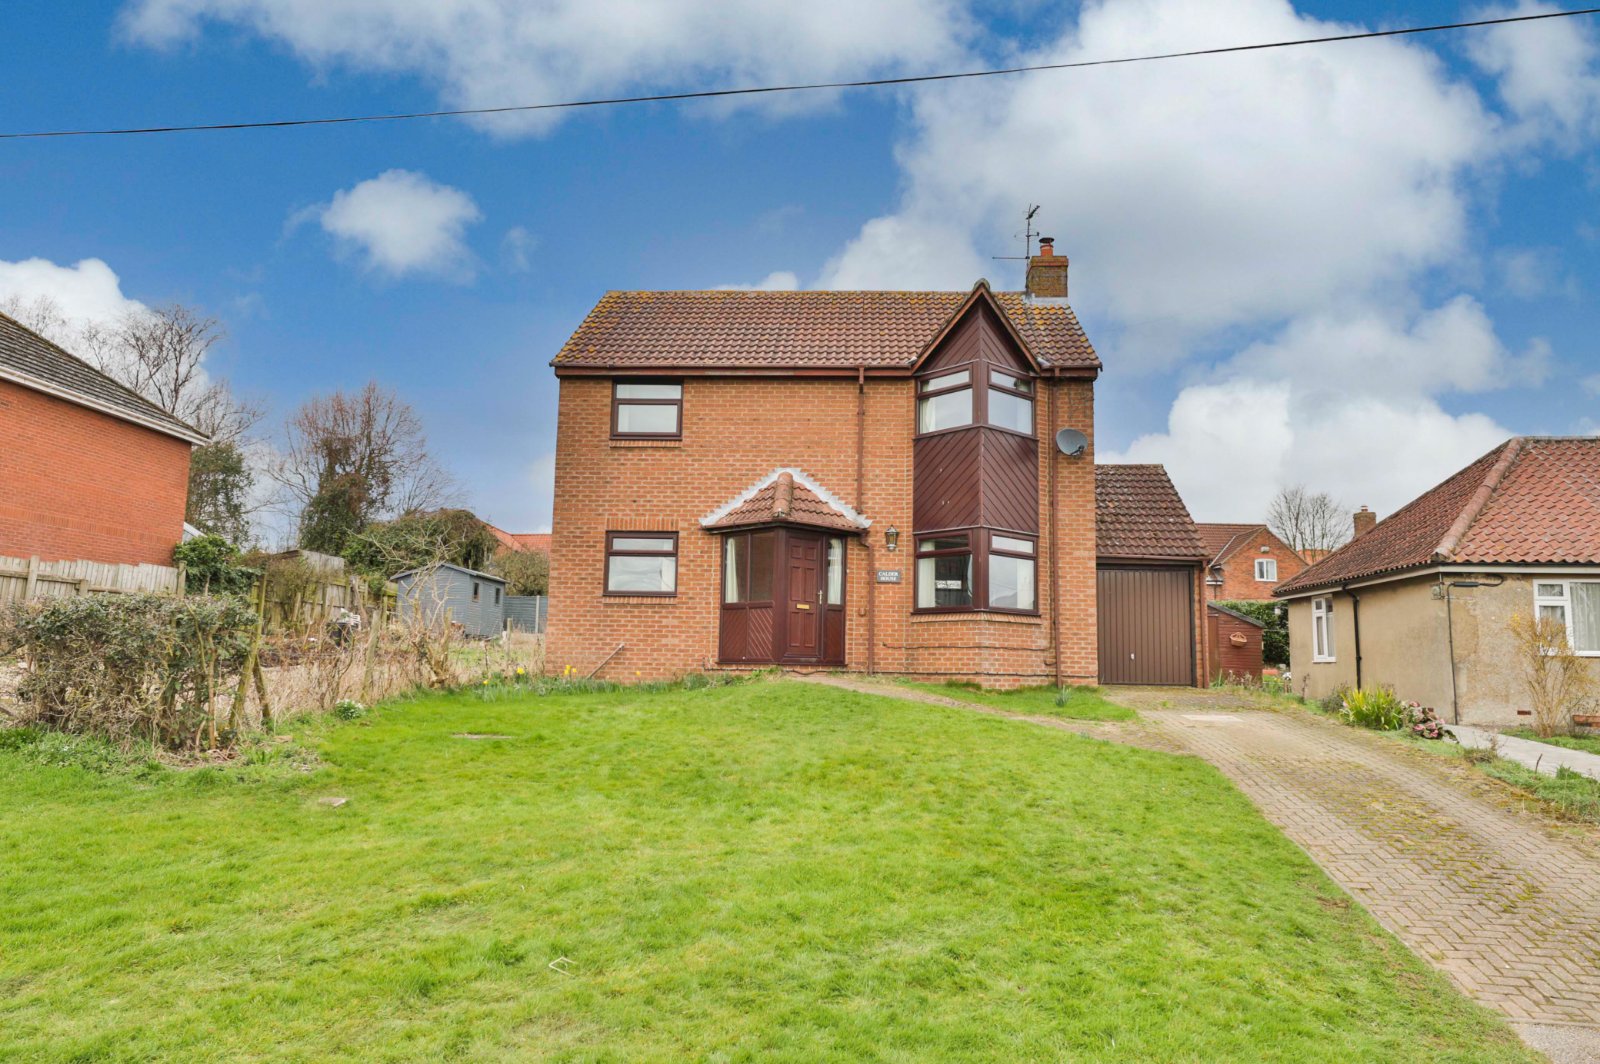 4 bed house for sale in Low Road, Everthorpe  - Property Image 1